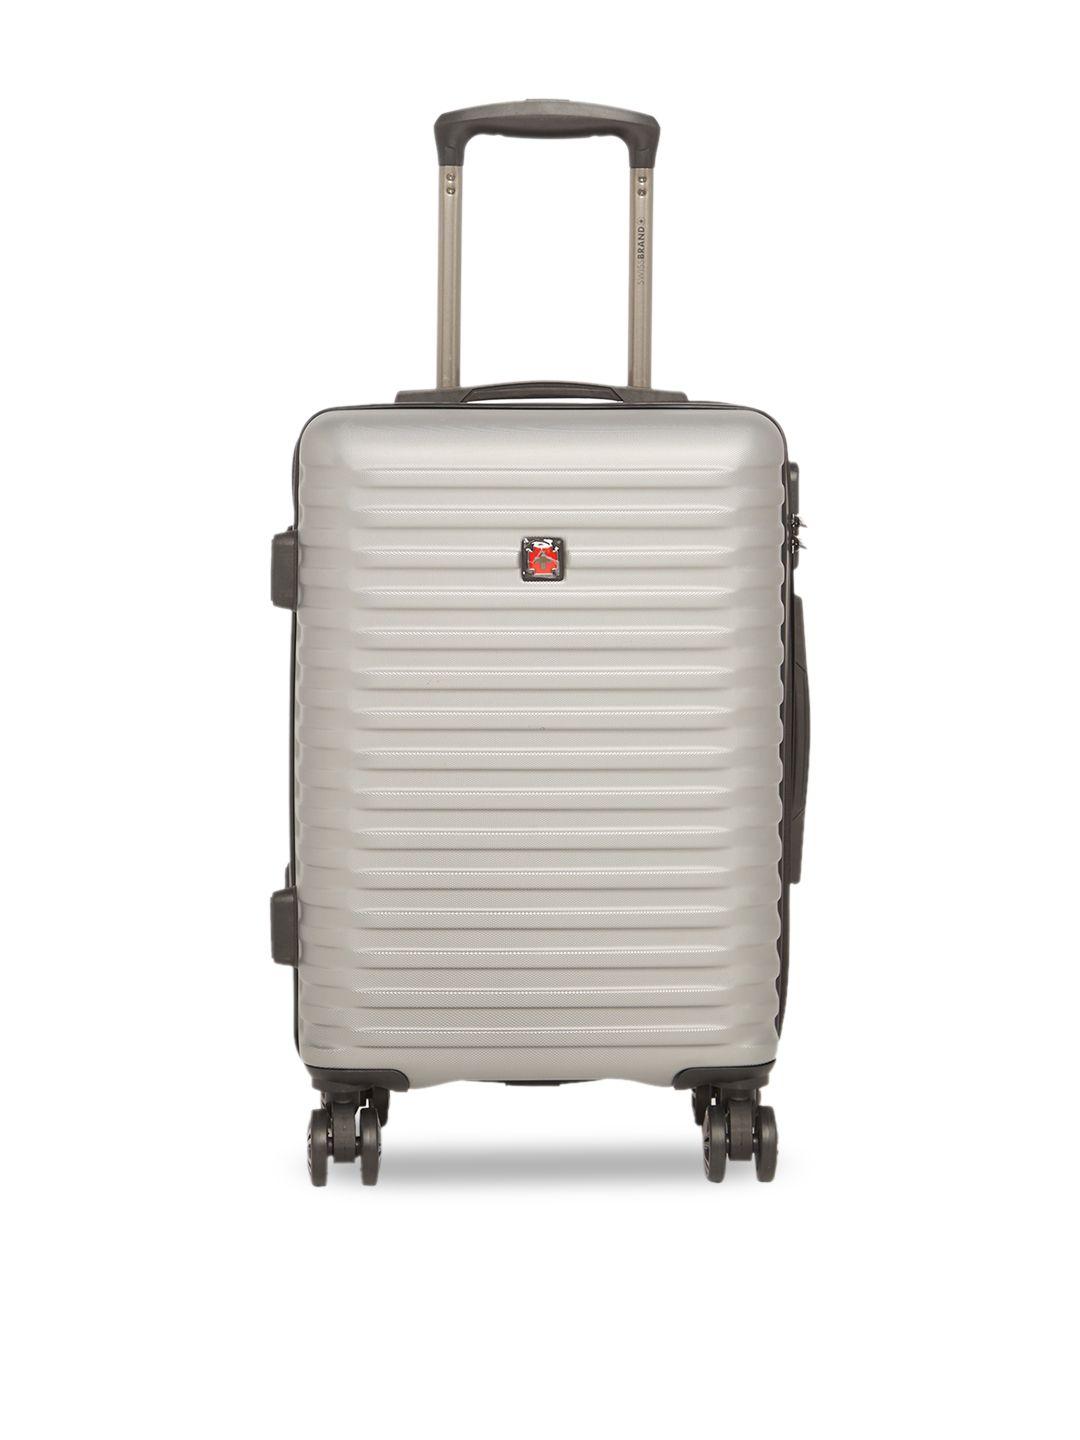 swiss brand grey solid dublin 360-degree rotation hard-sided cabin trolley suitcase